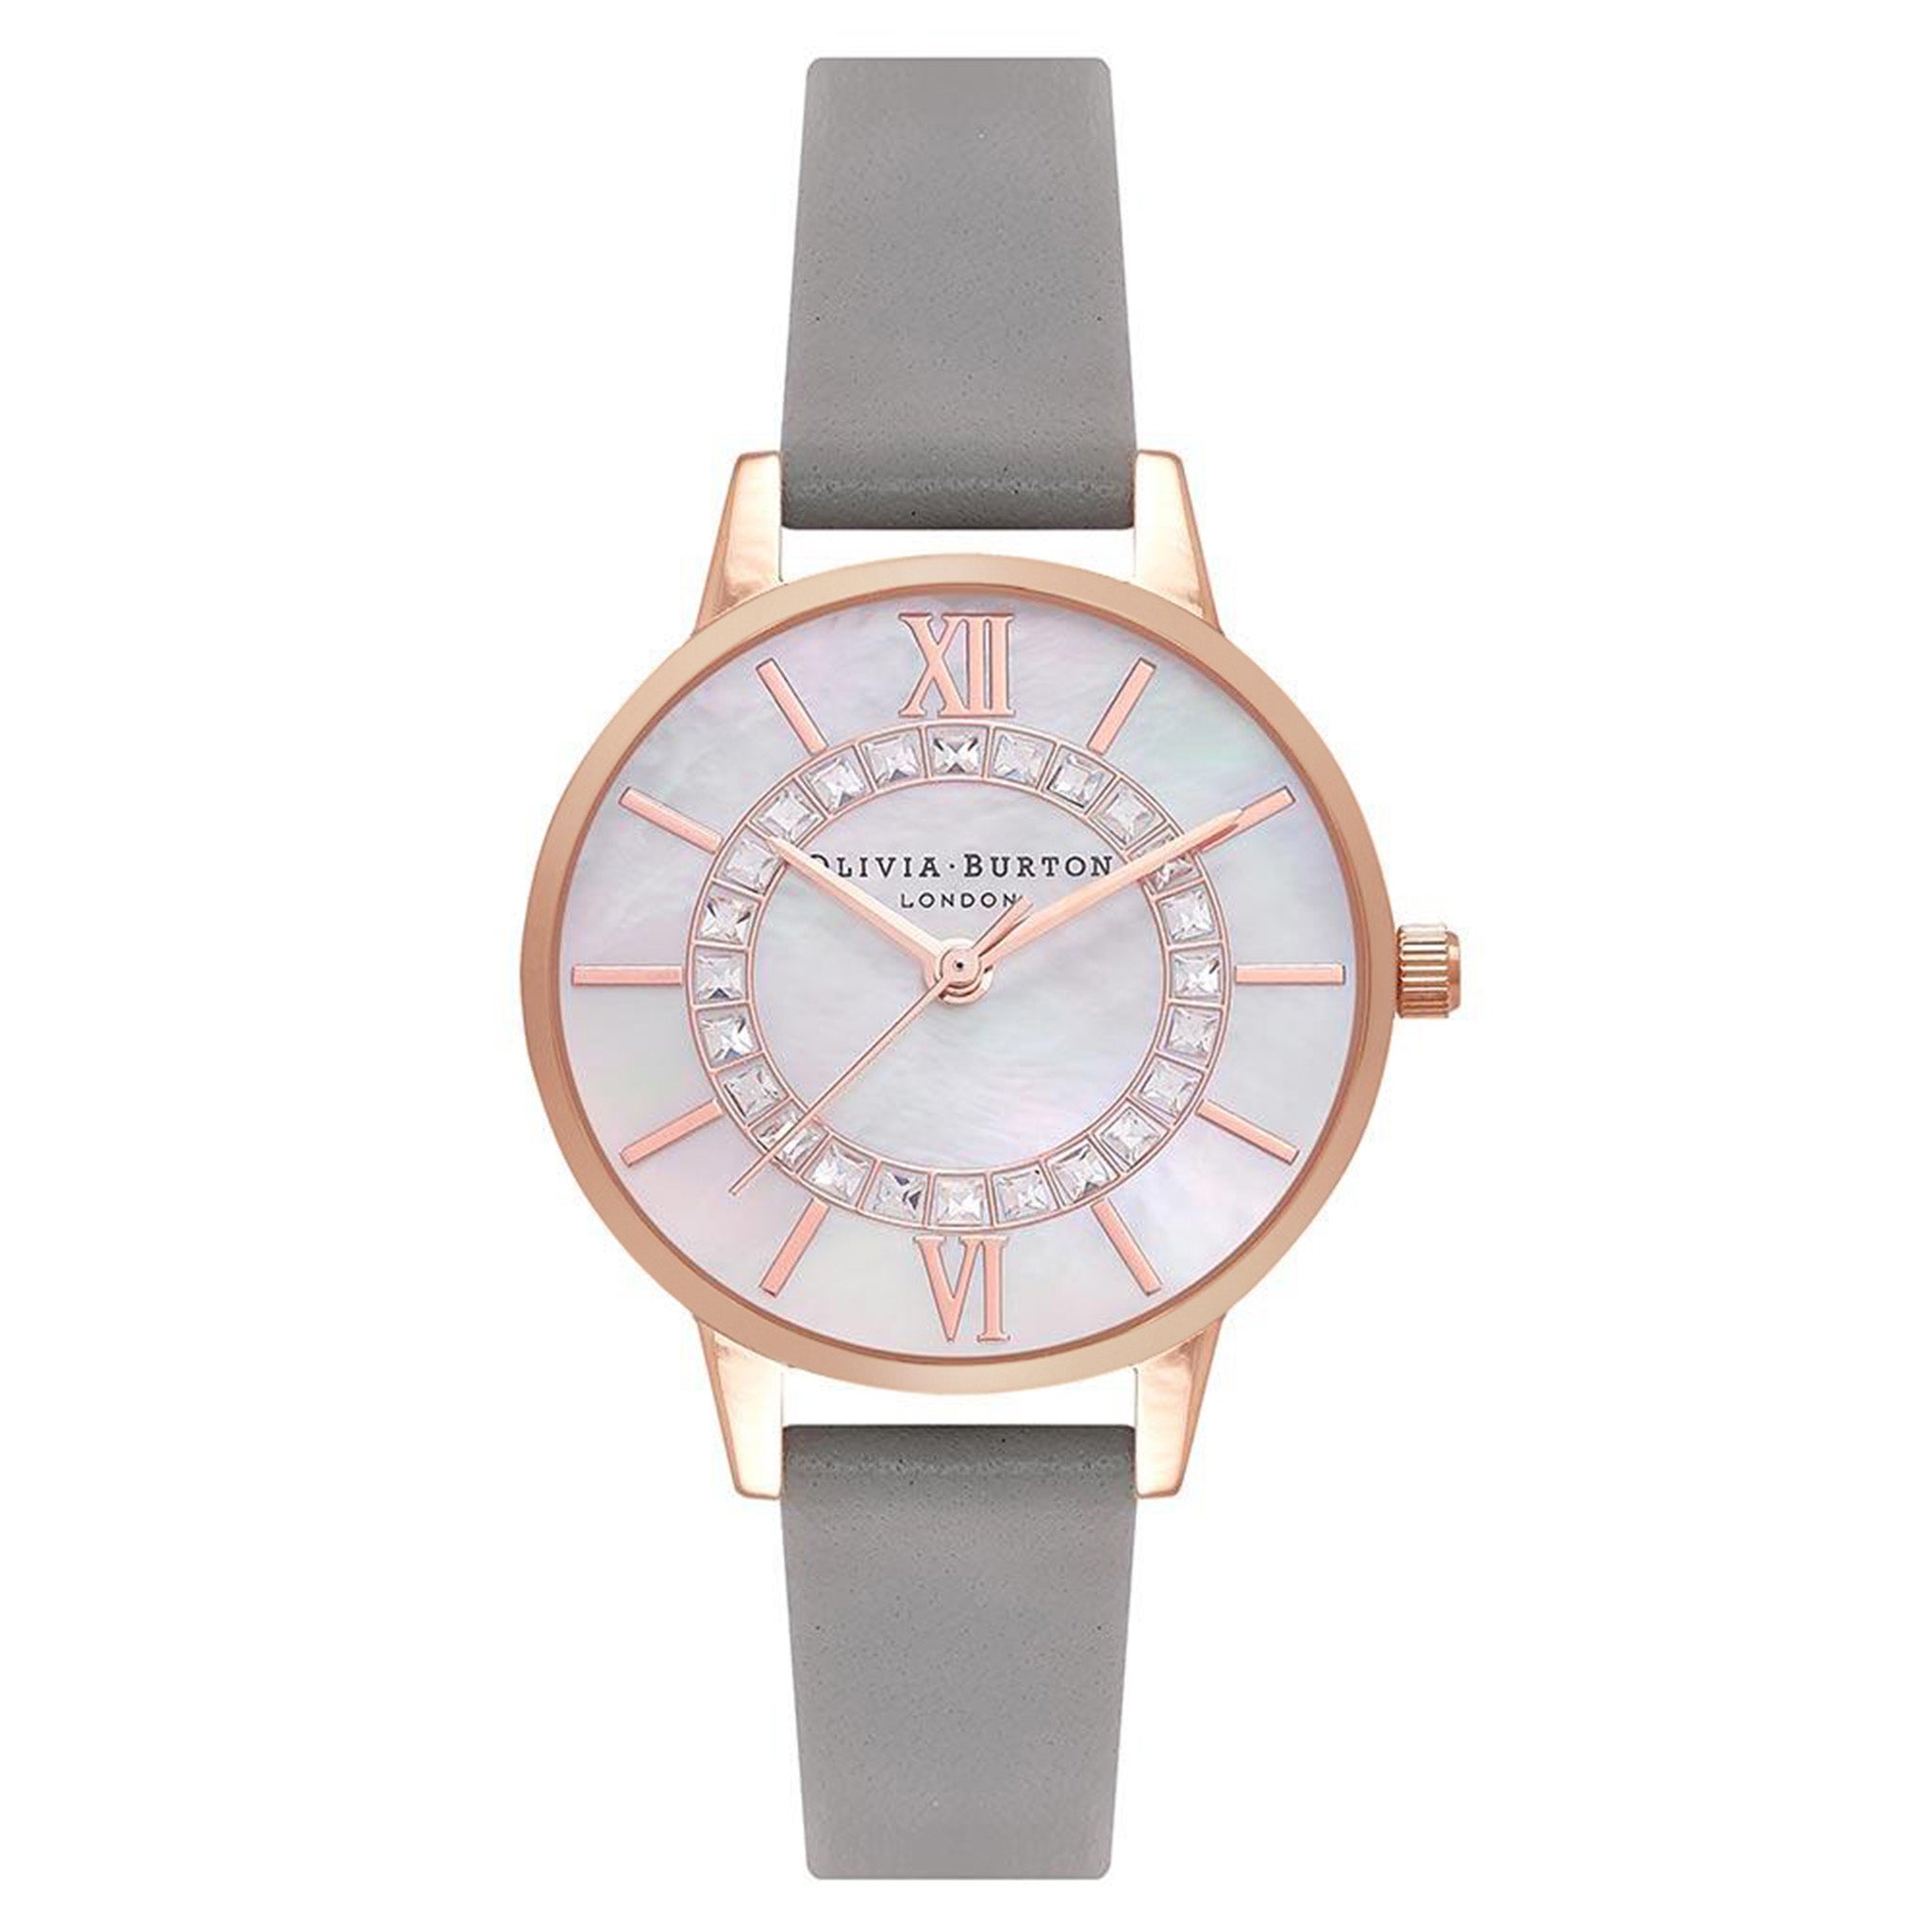 Olivia Burton Steel Grey Leather White Mother Of Pearl & Stone Dial Ladies Watch